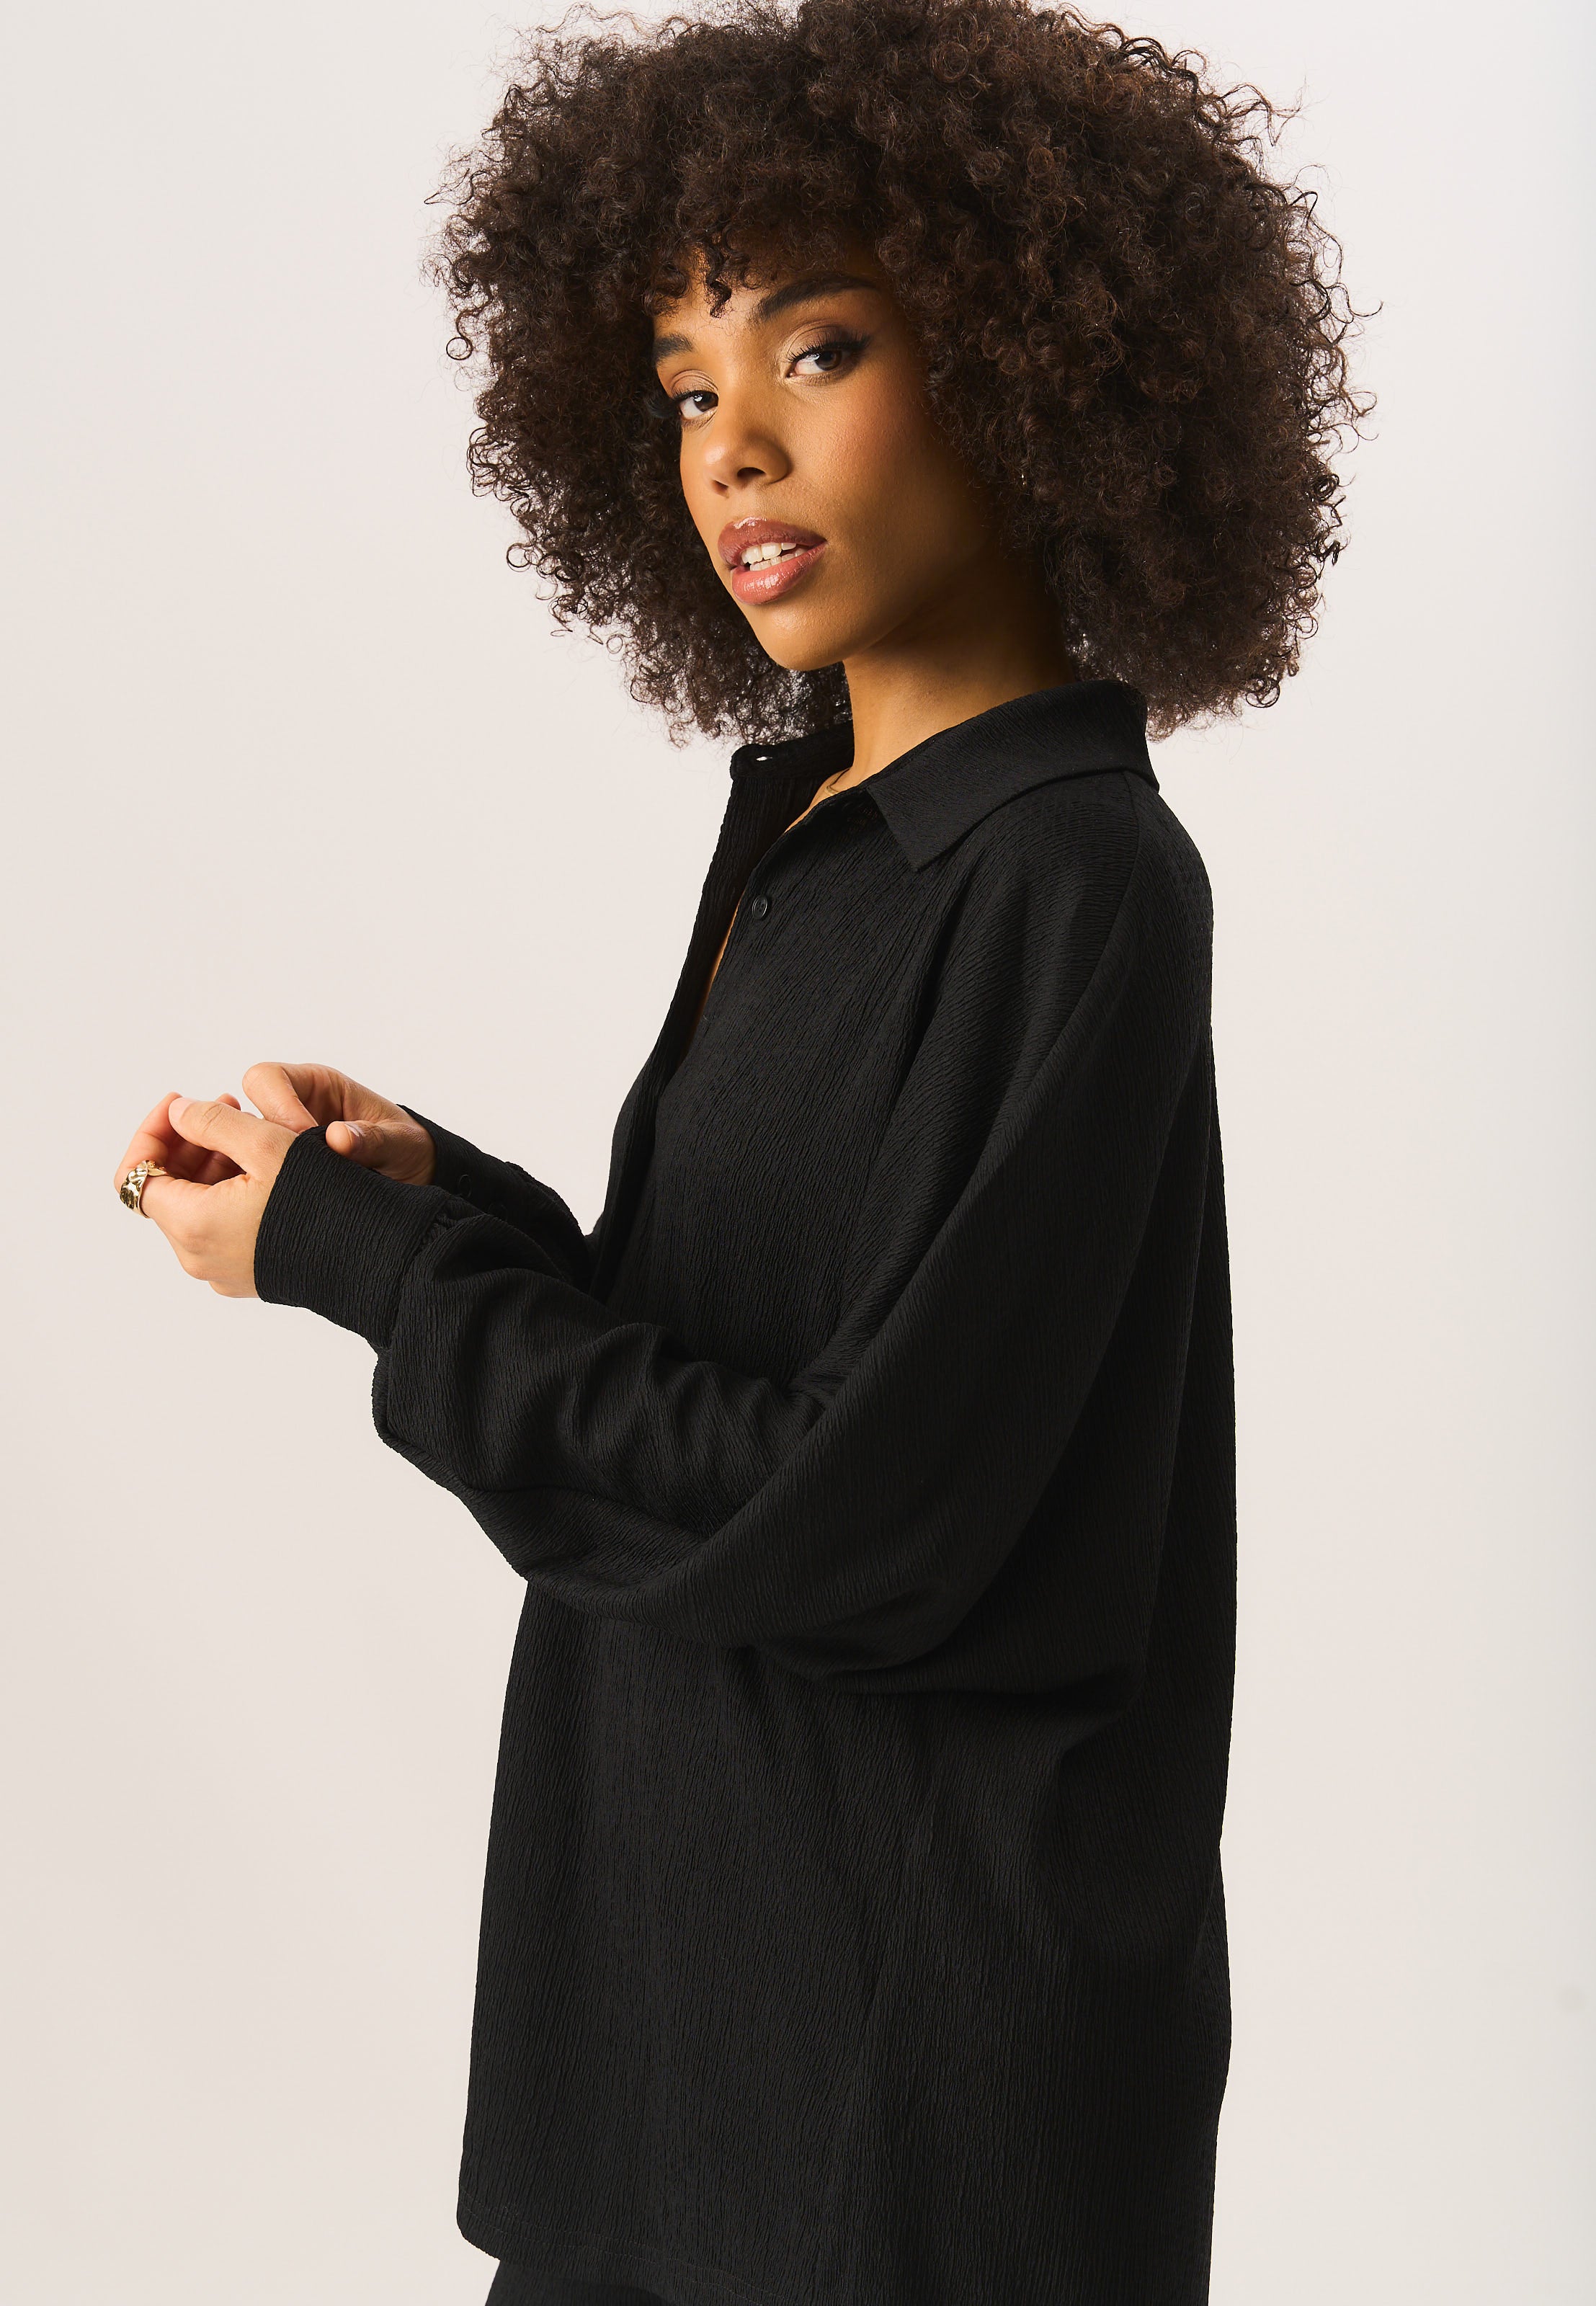 Black Textured Oversize Fit Long Sleeves Shirt